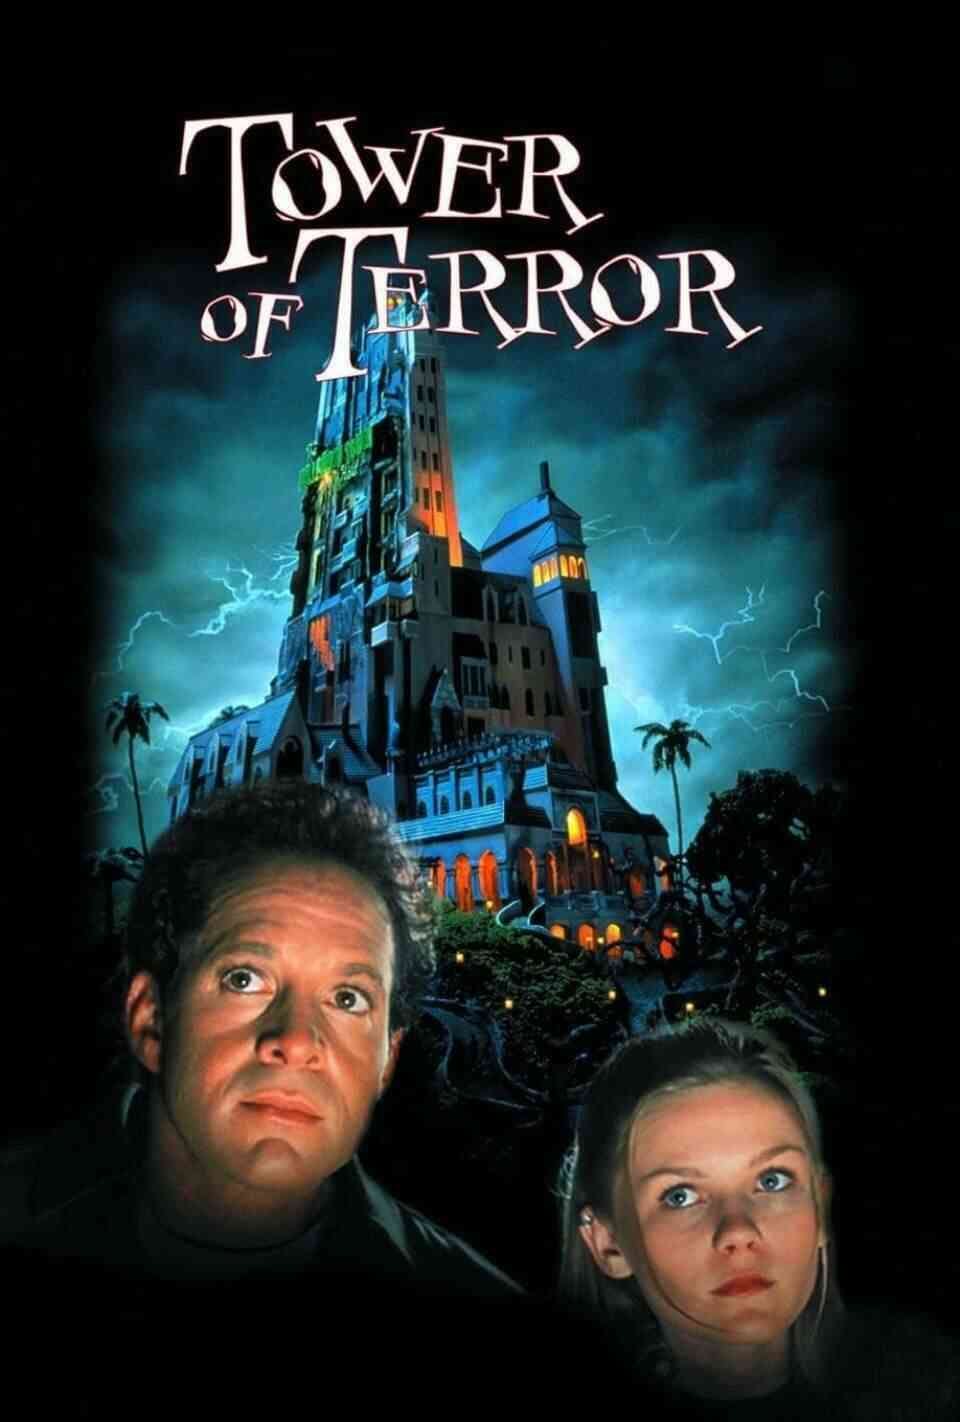 Read Tower of Terror screenplay (poster)